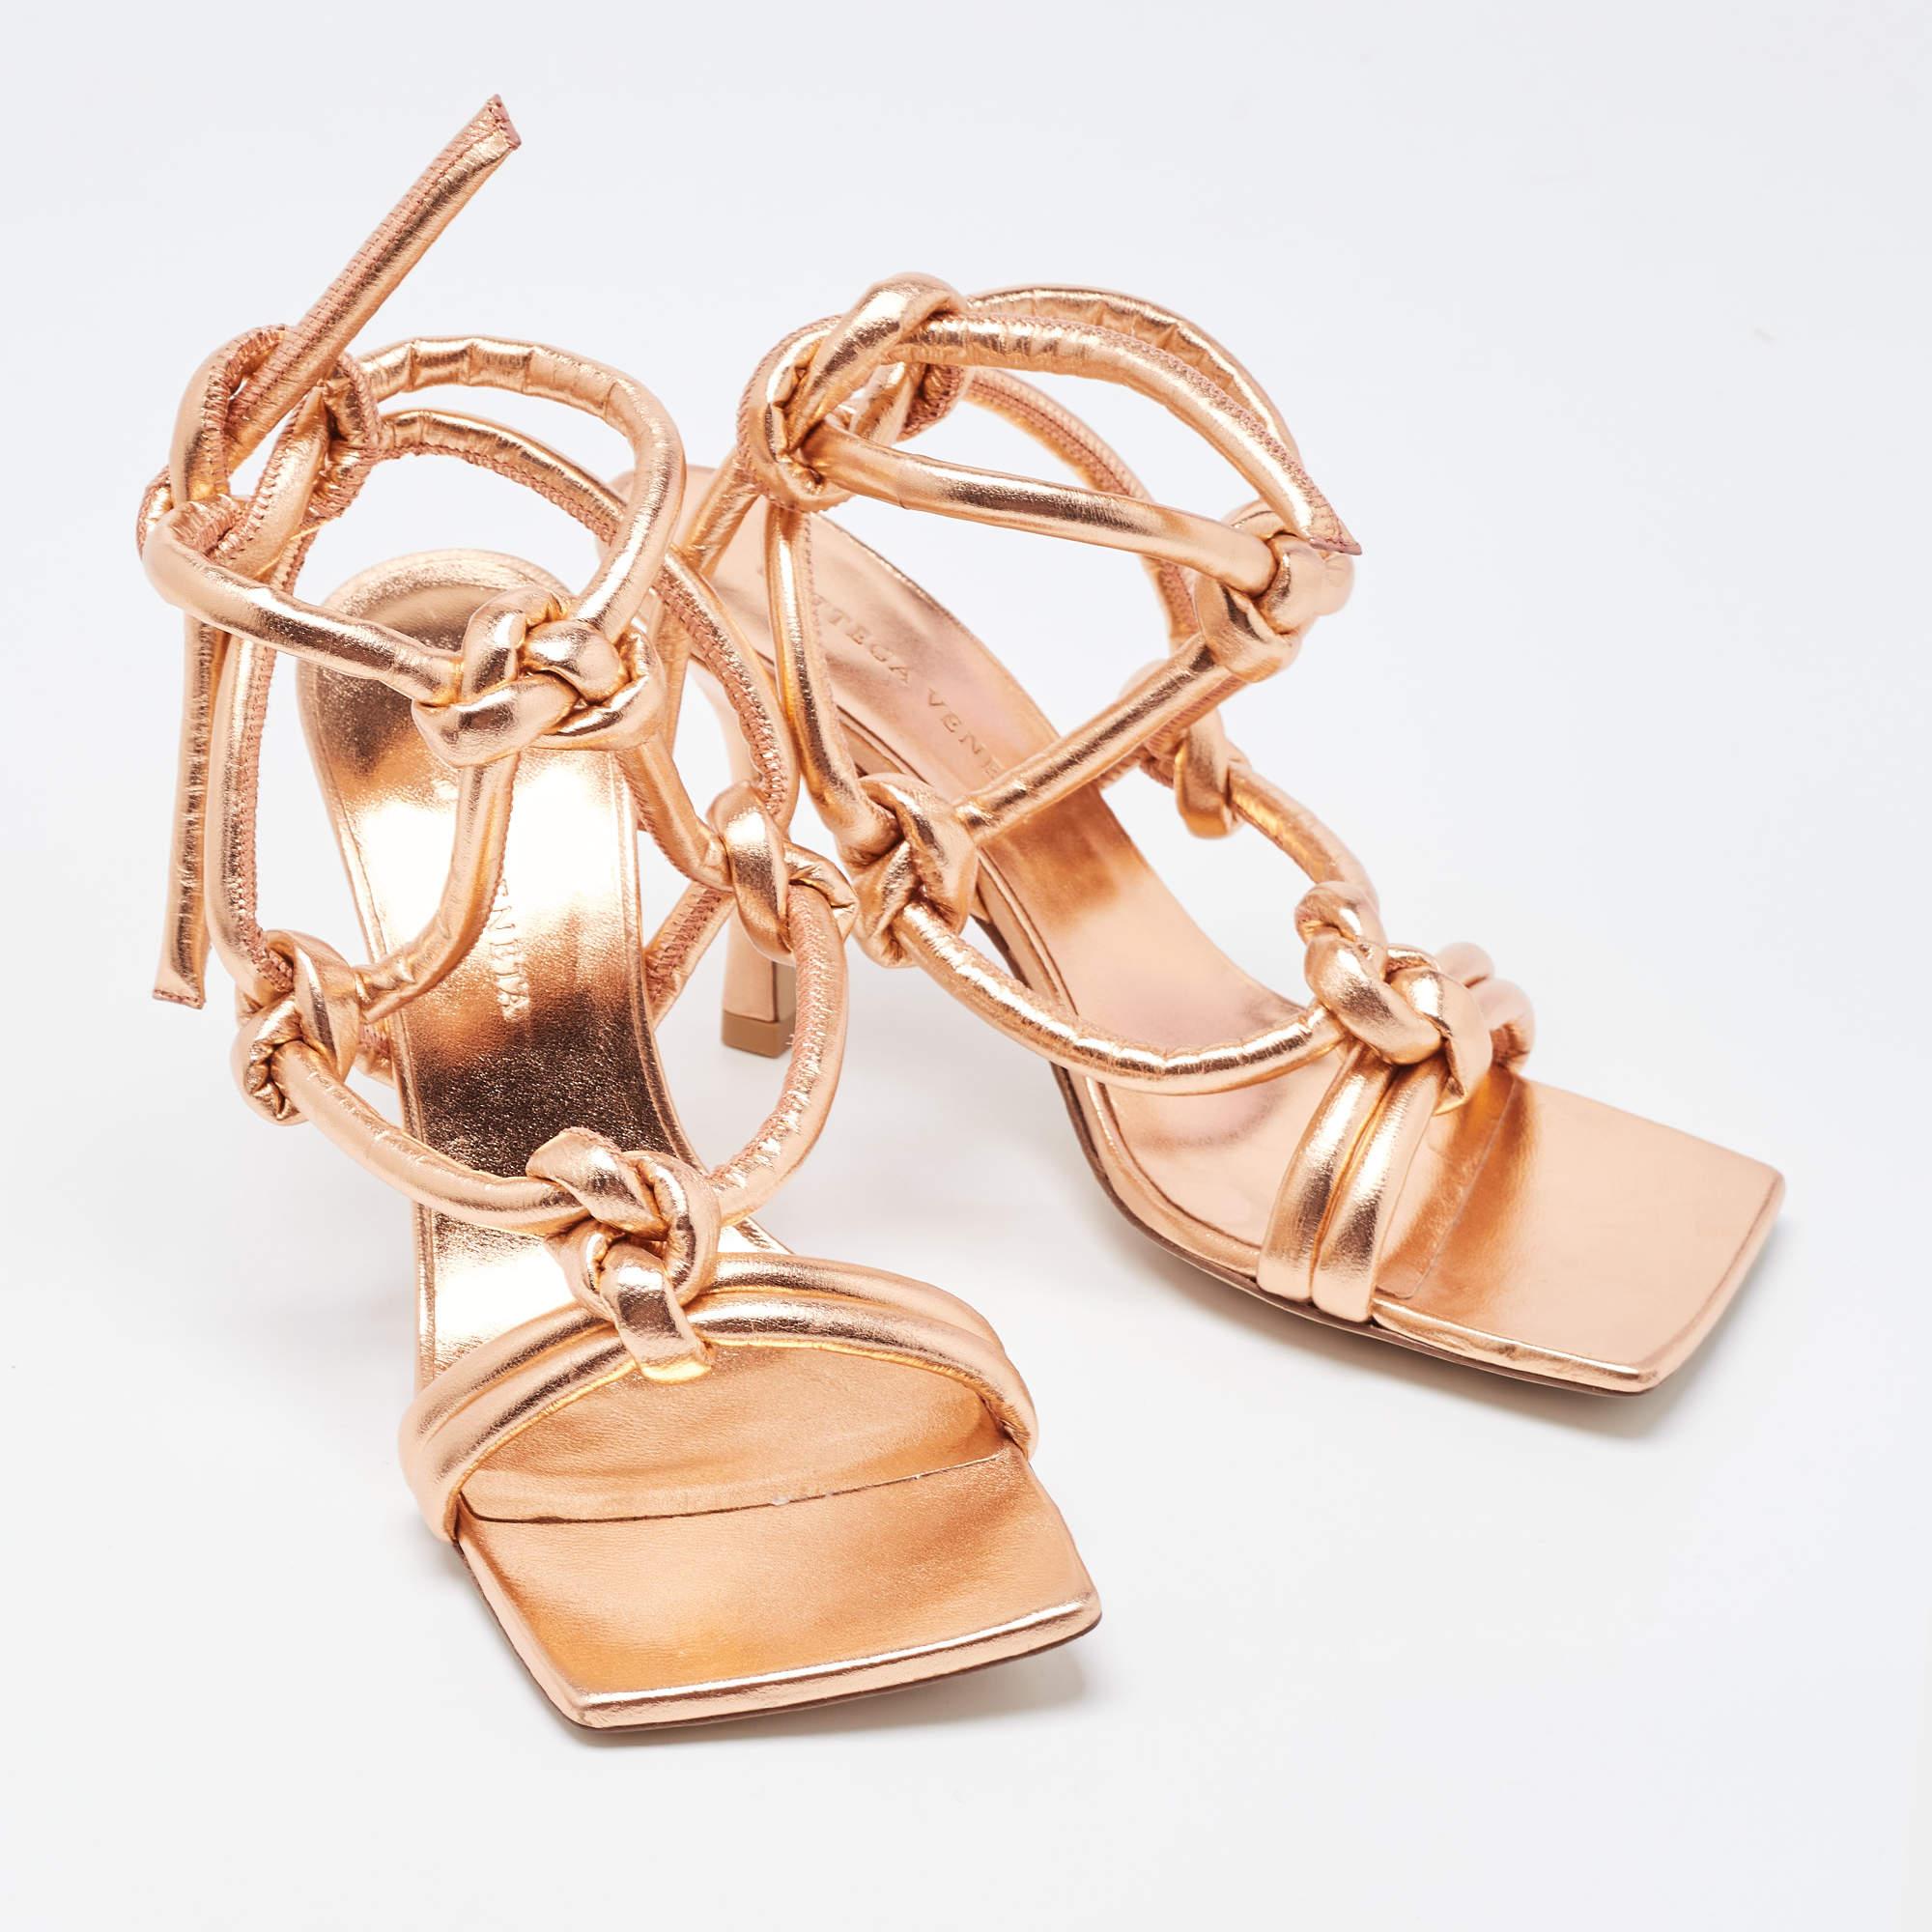 Women's Bottega Veneta Rose Gold Knotted Leather Ankle Tie Sandals Size 36